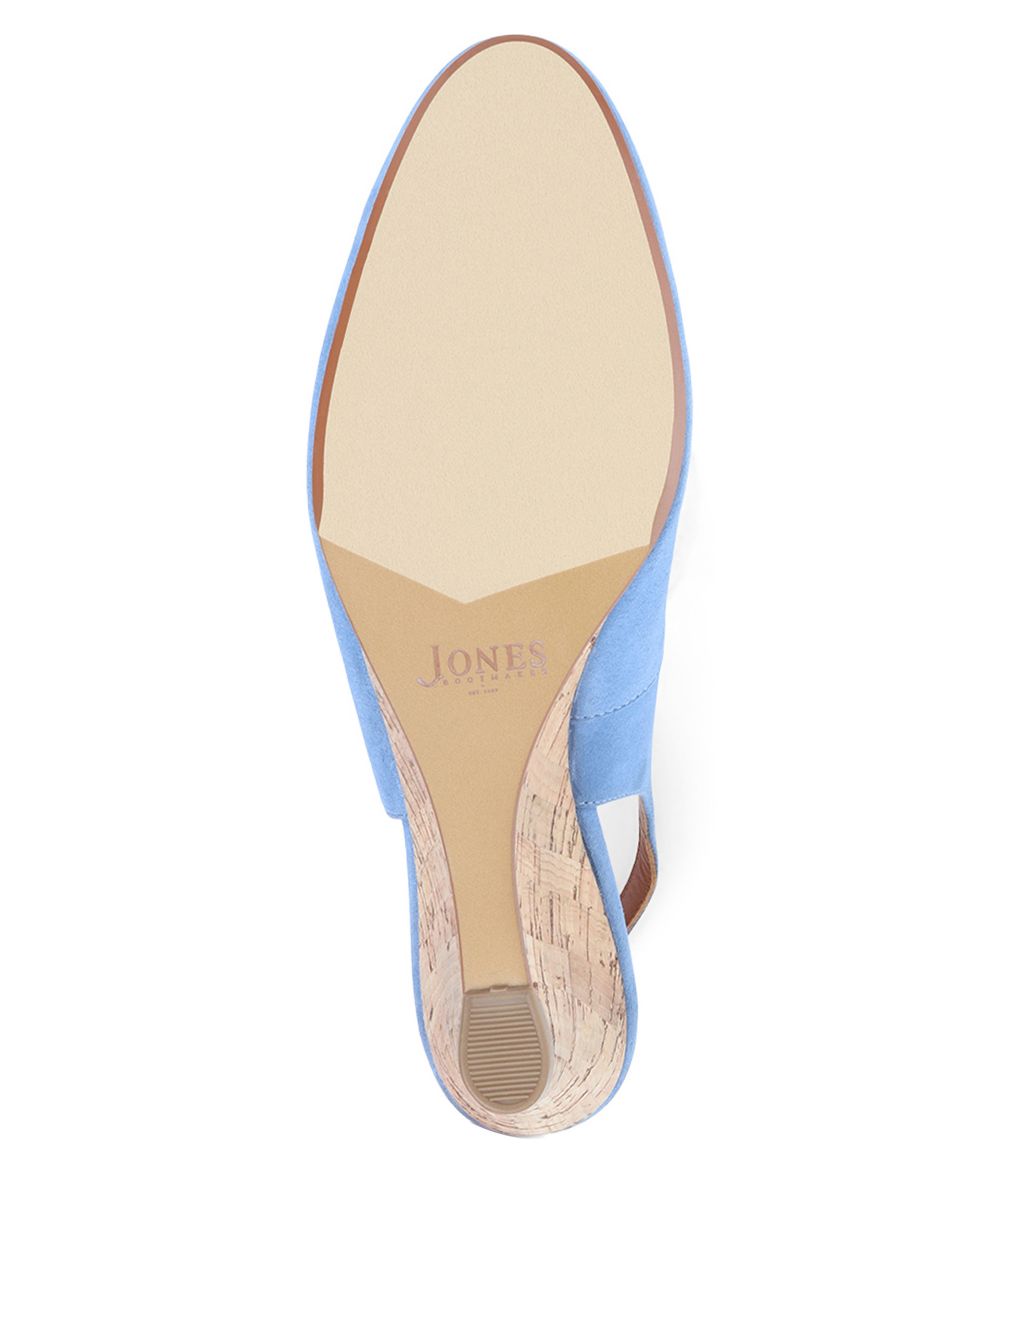 Suede Wedge Slingback Shoes image 5